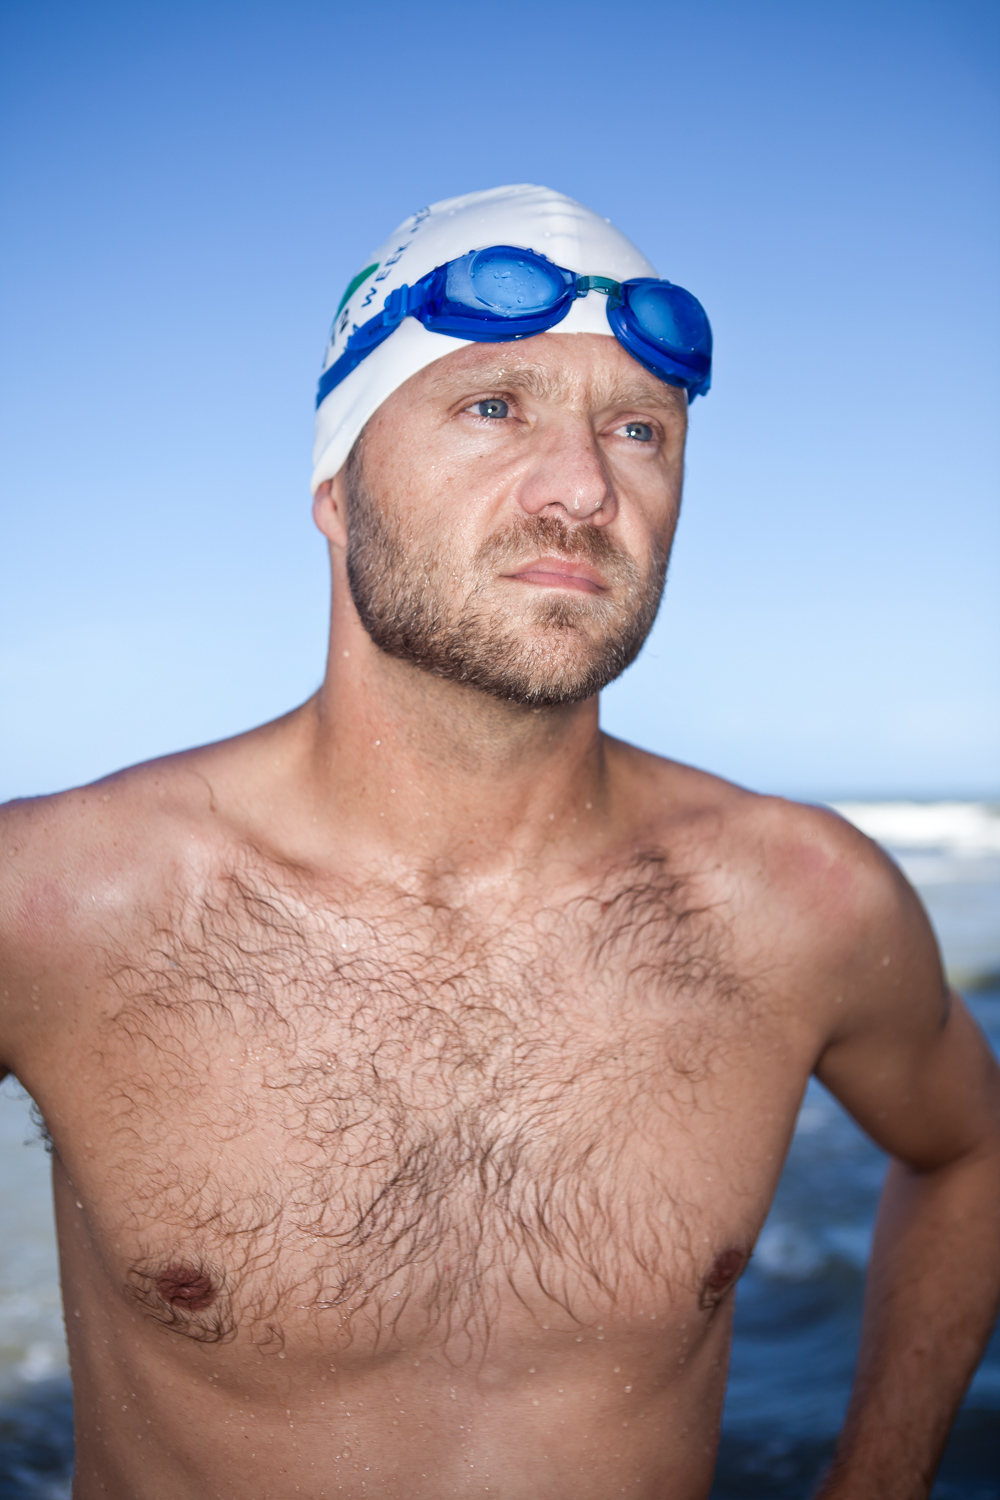   Brian Lanahan, college professor and long-distance swimmer  